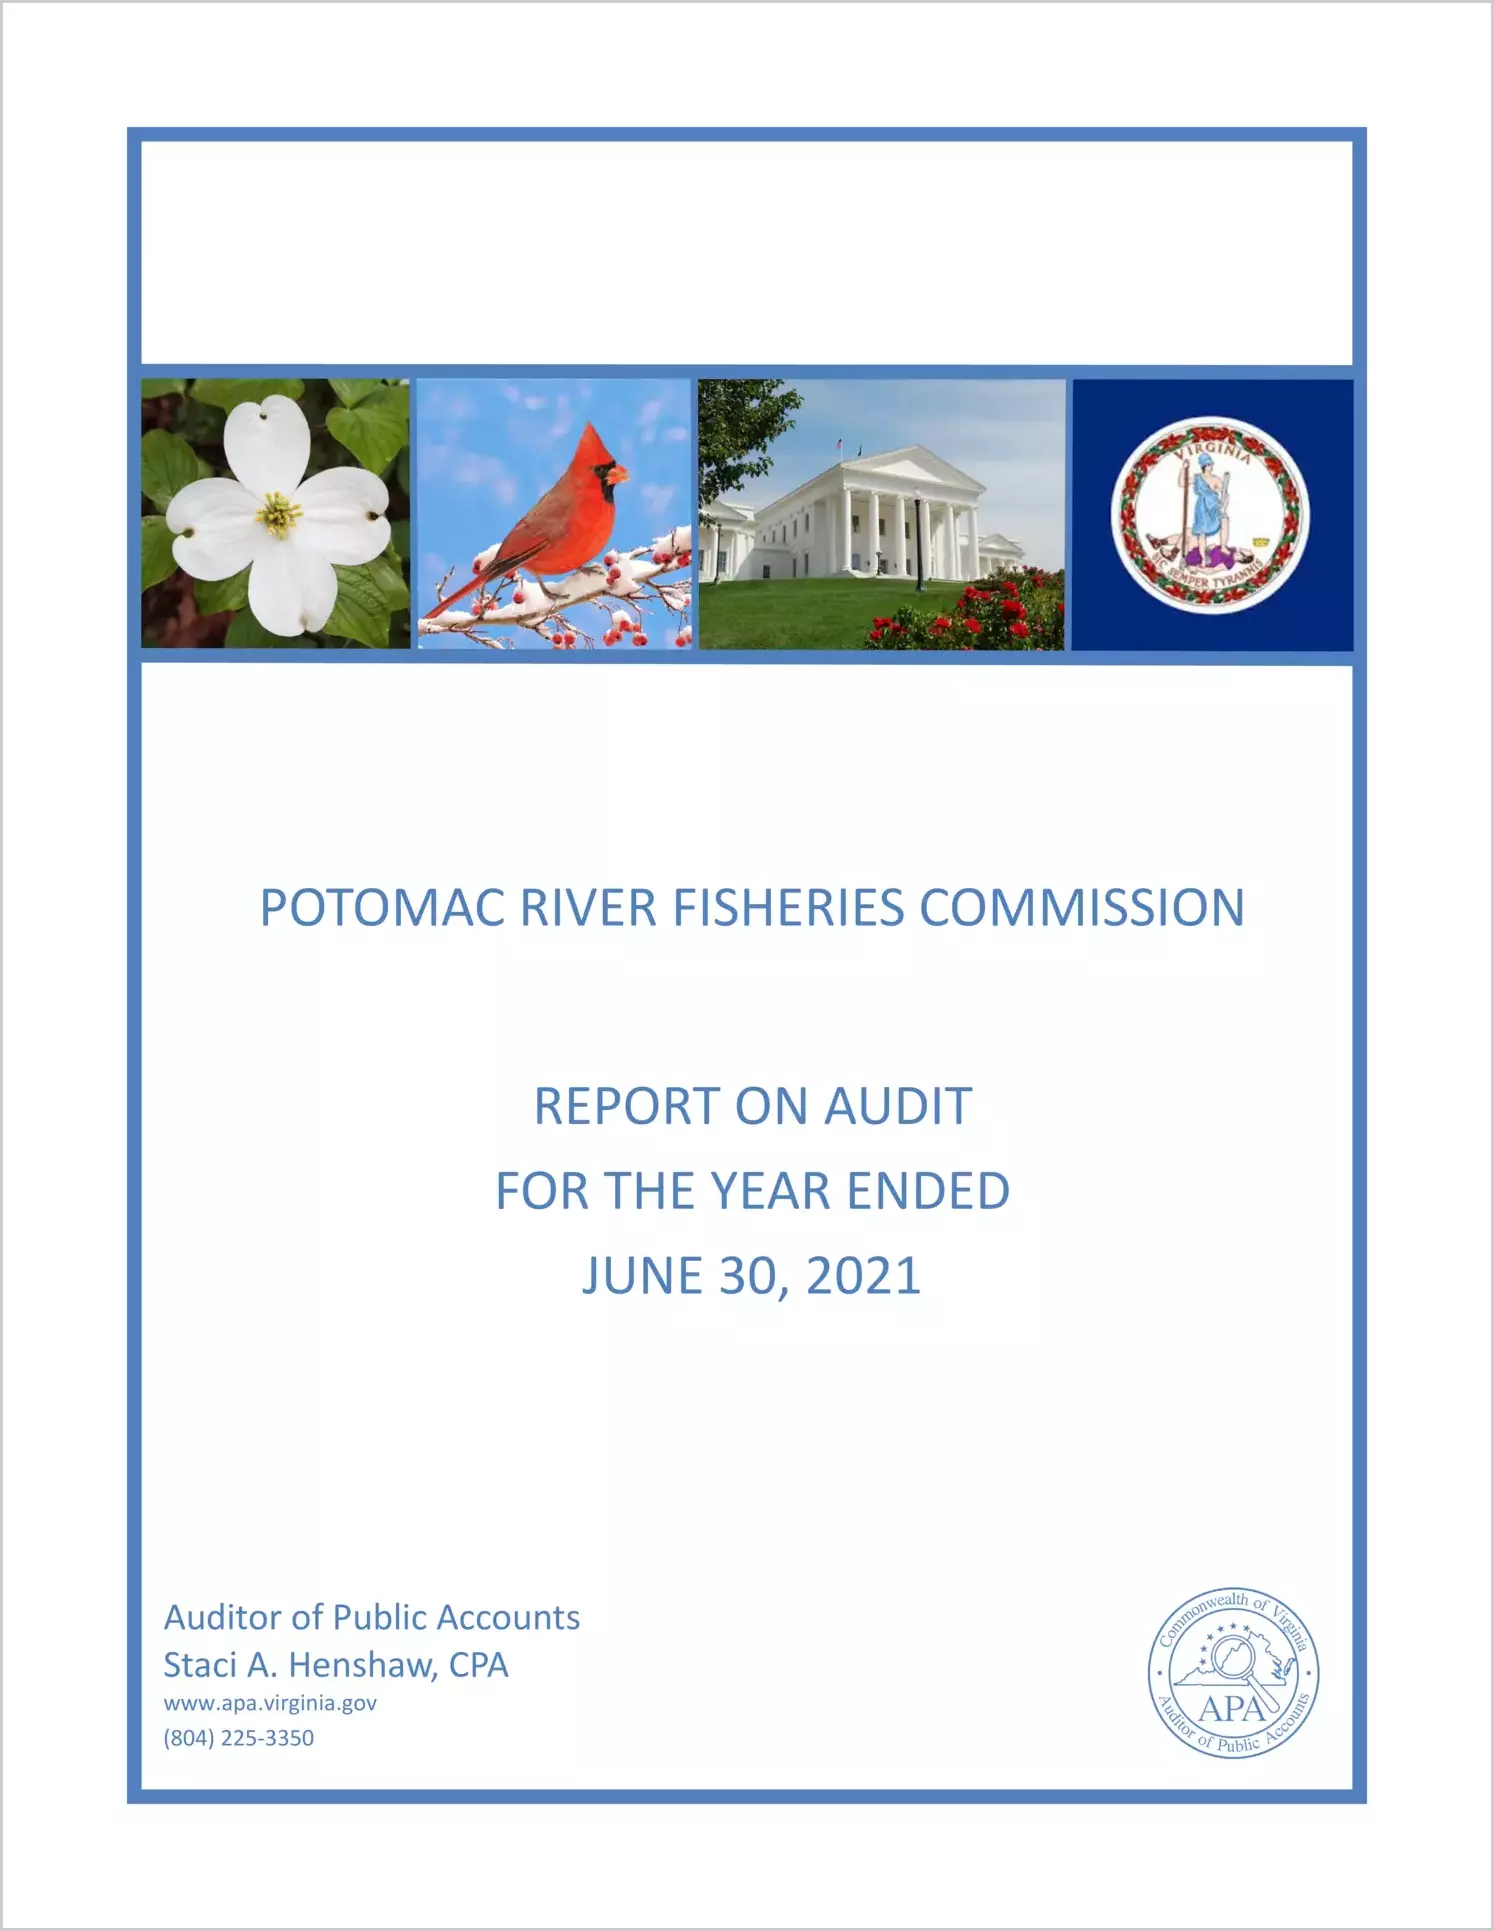 Potomac River Fisheries Commission for the year ended June 30, 2021